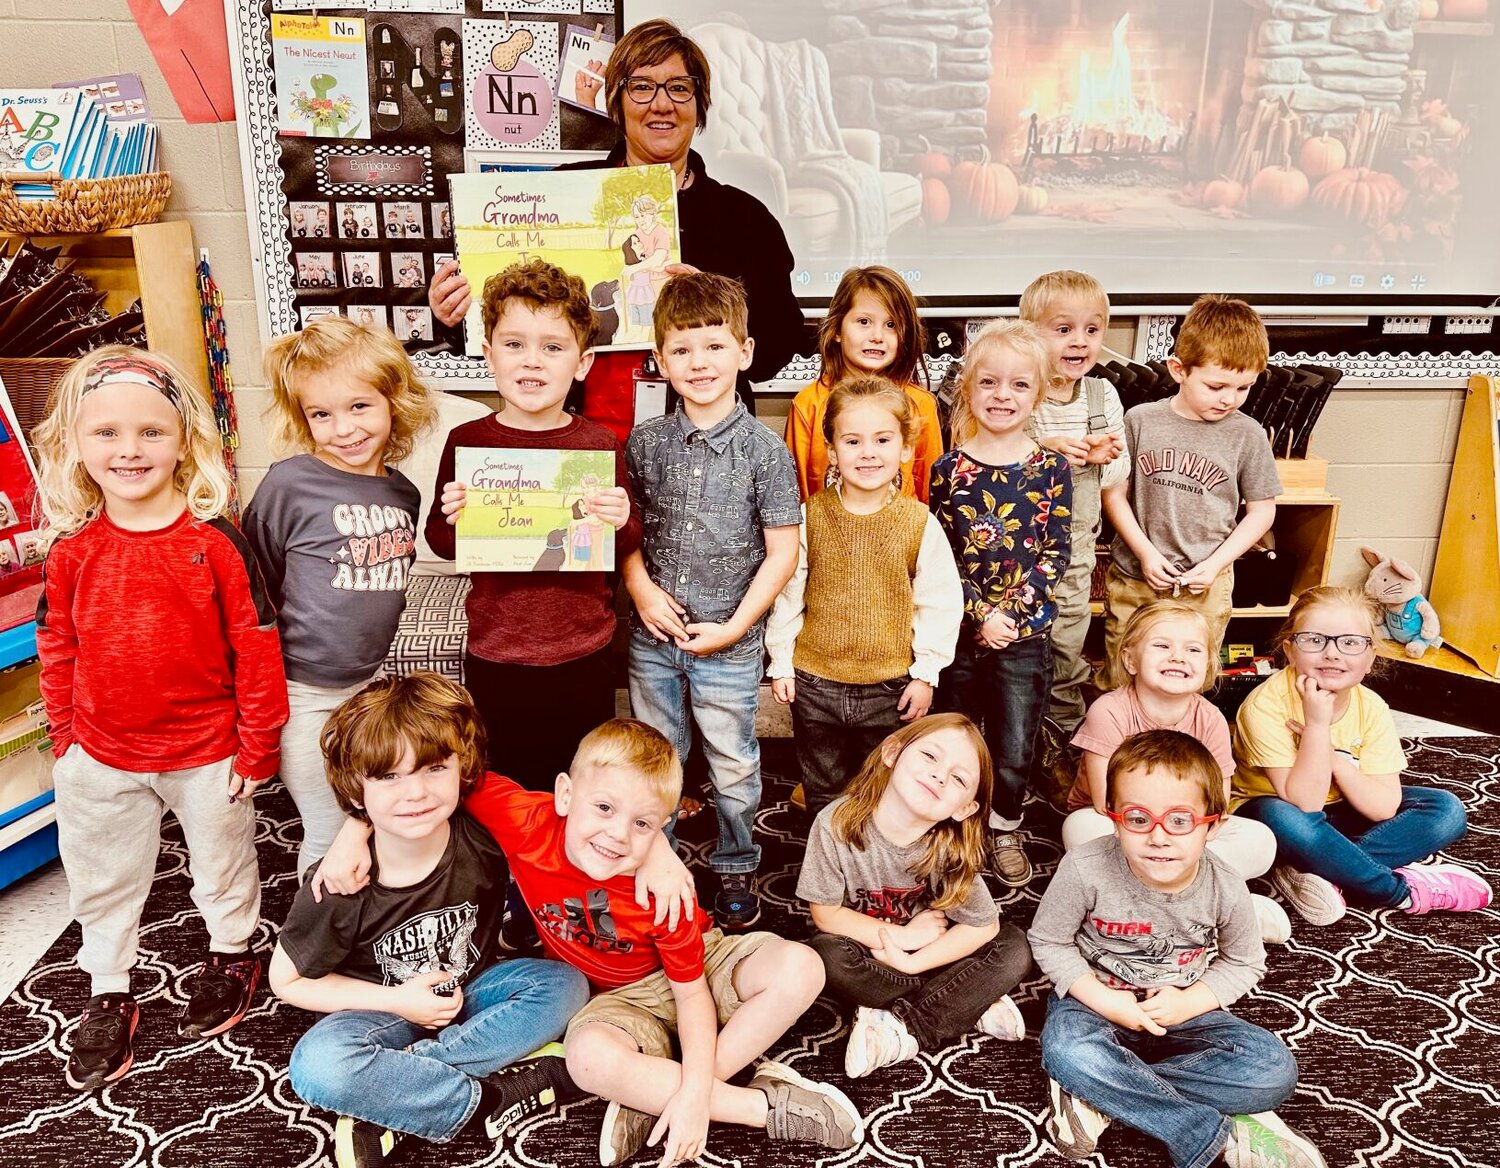 South Fork Elementary Preschool students recently had the opportunity to meet Jill Pietroburgo, a local author and one of West Plains R-7 School District’s special education teachers. Pietroburgo shared her new book, "Sometimes Grandma Calls Me Jean," and inspired the class with gratitude for family memories and being thankful for loved ones.